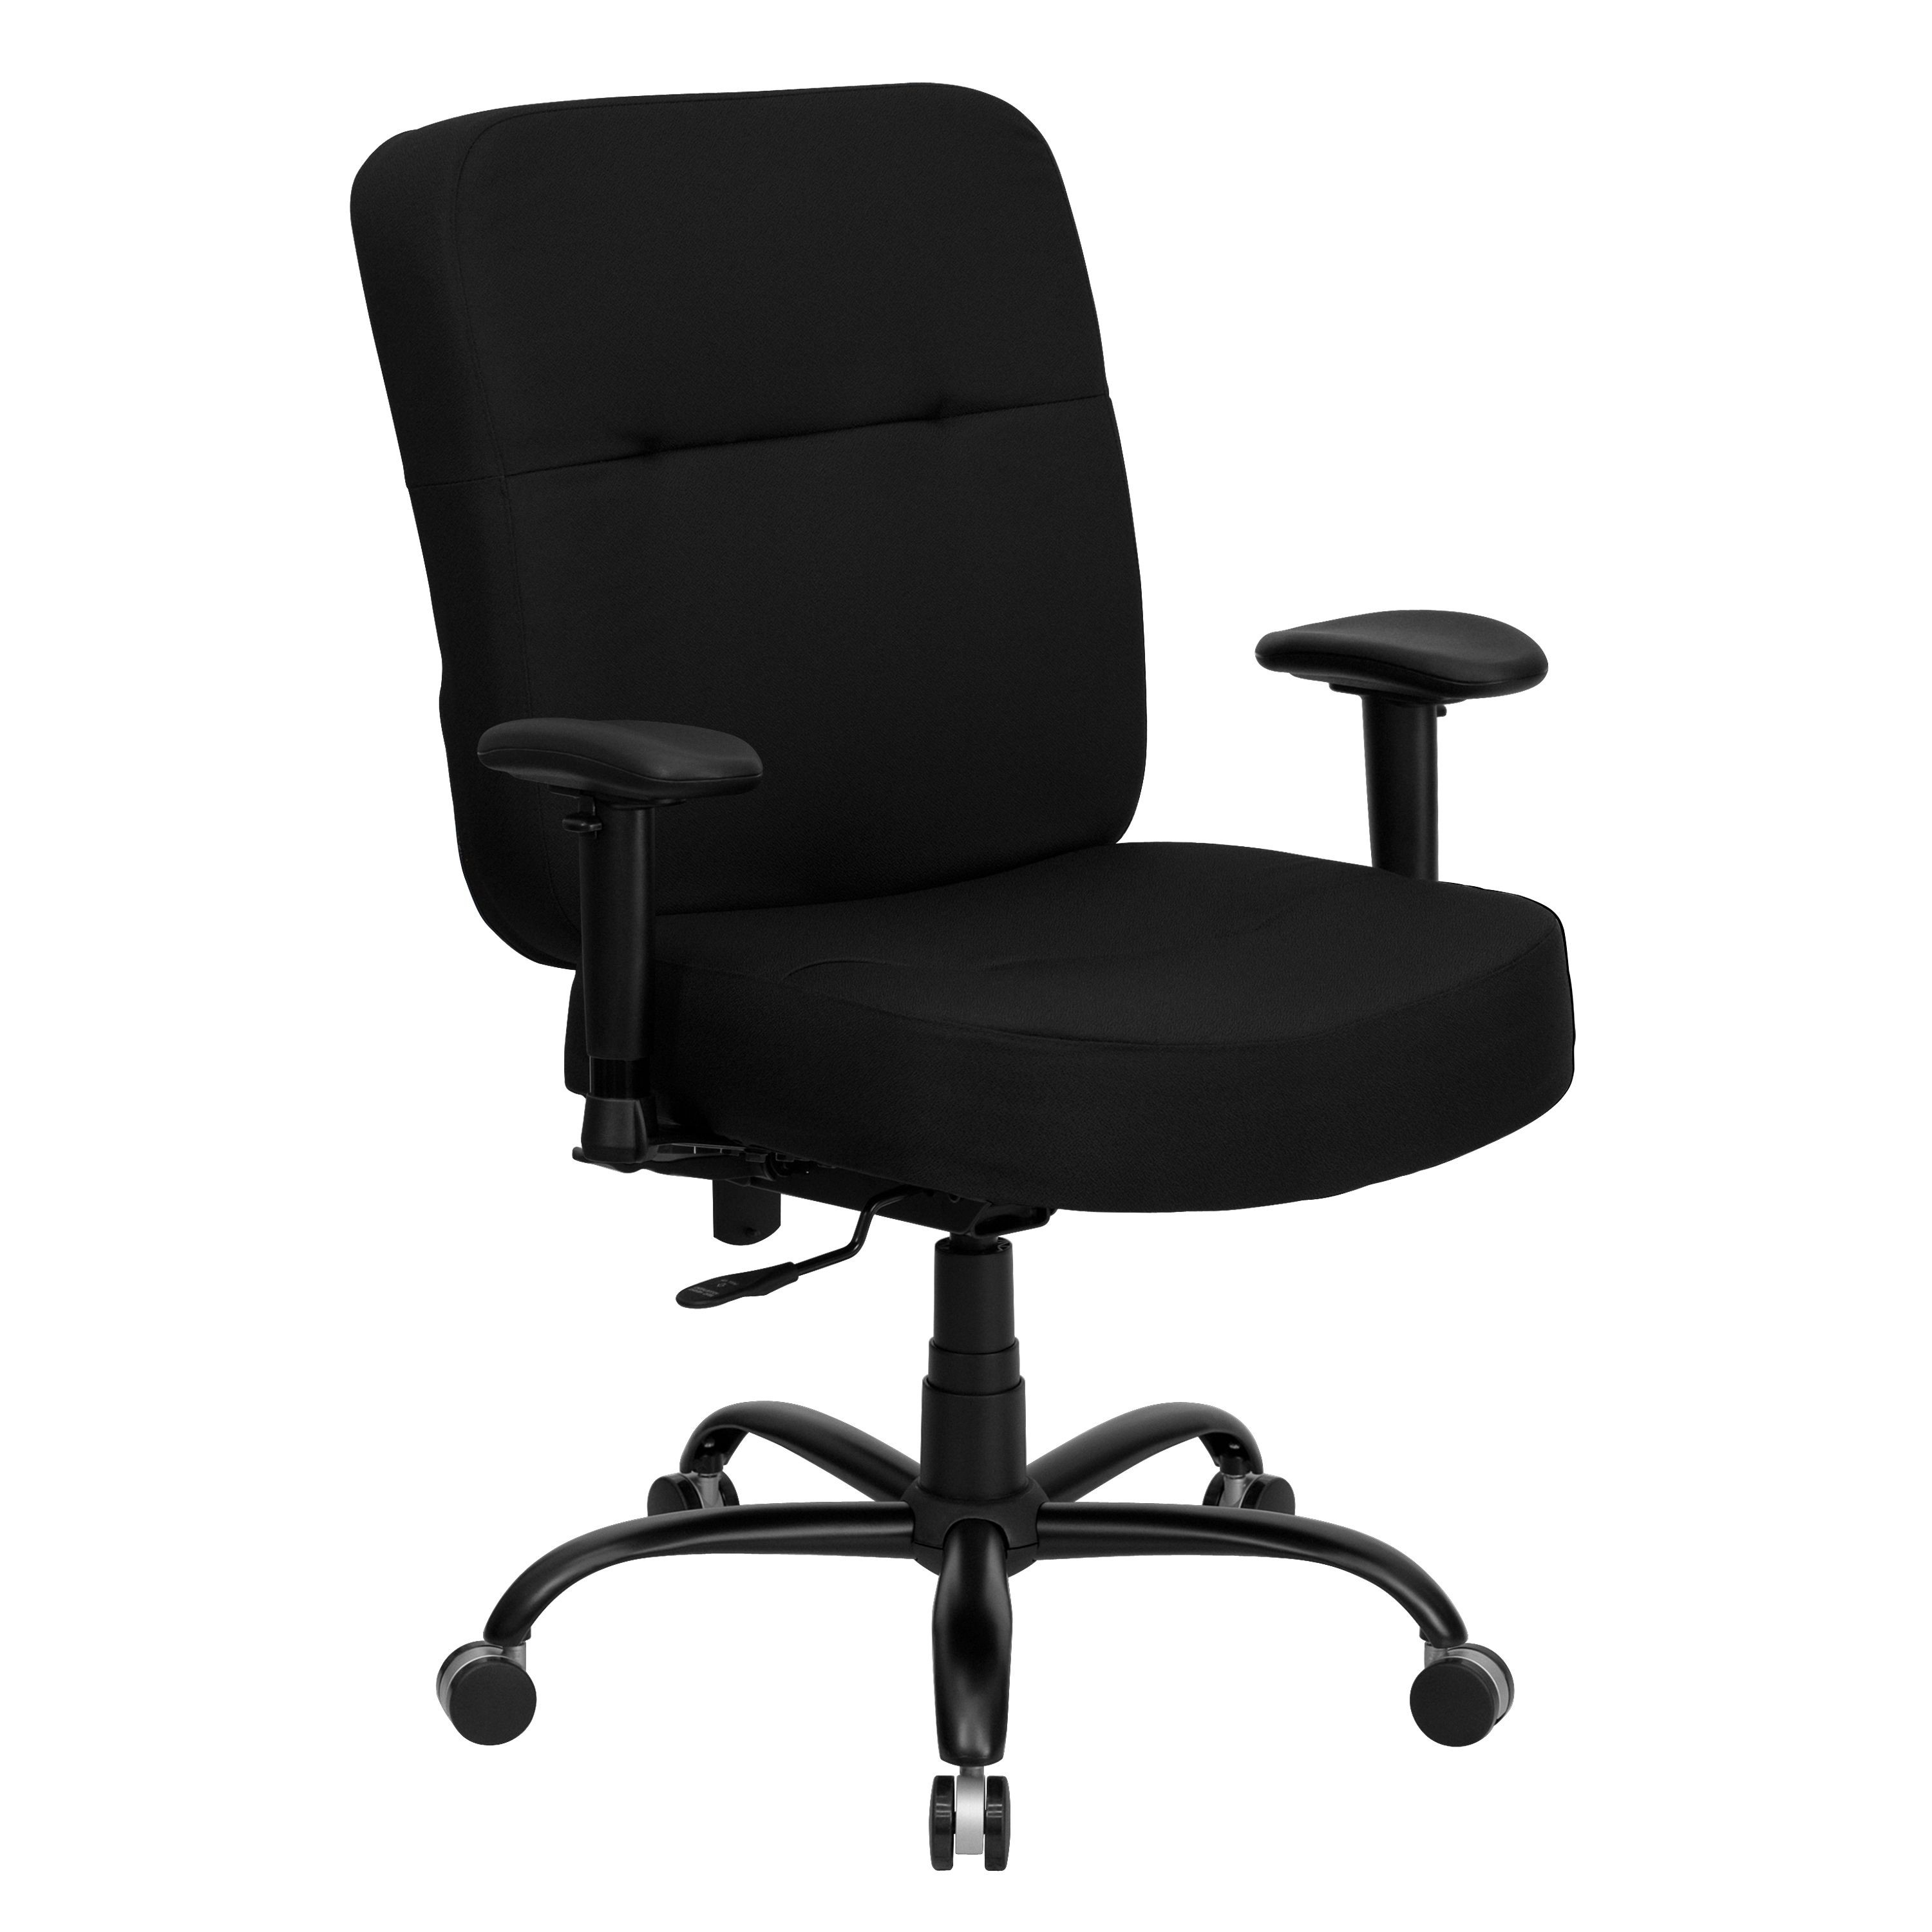 Flash Furniture WL-735SYG-BK-A-GG HERCULES Series Big & Tall Black Fabric Executive Task Chair with Extra Wide Seat and Arms, 400 Lb. Capacity